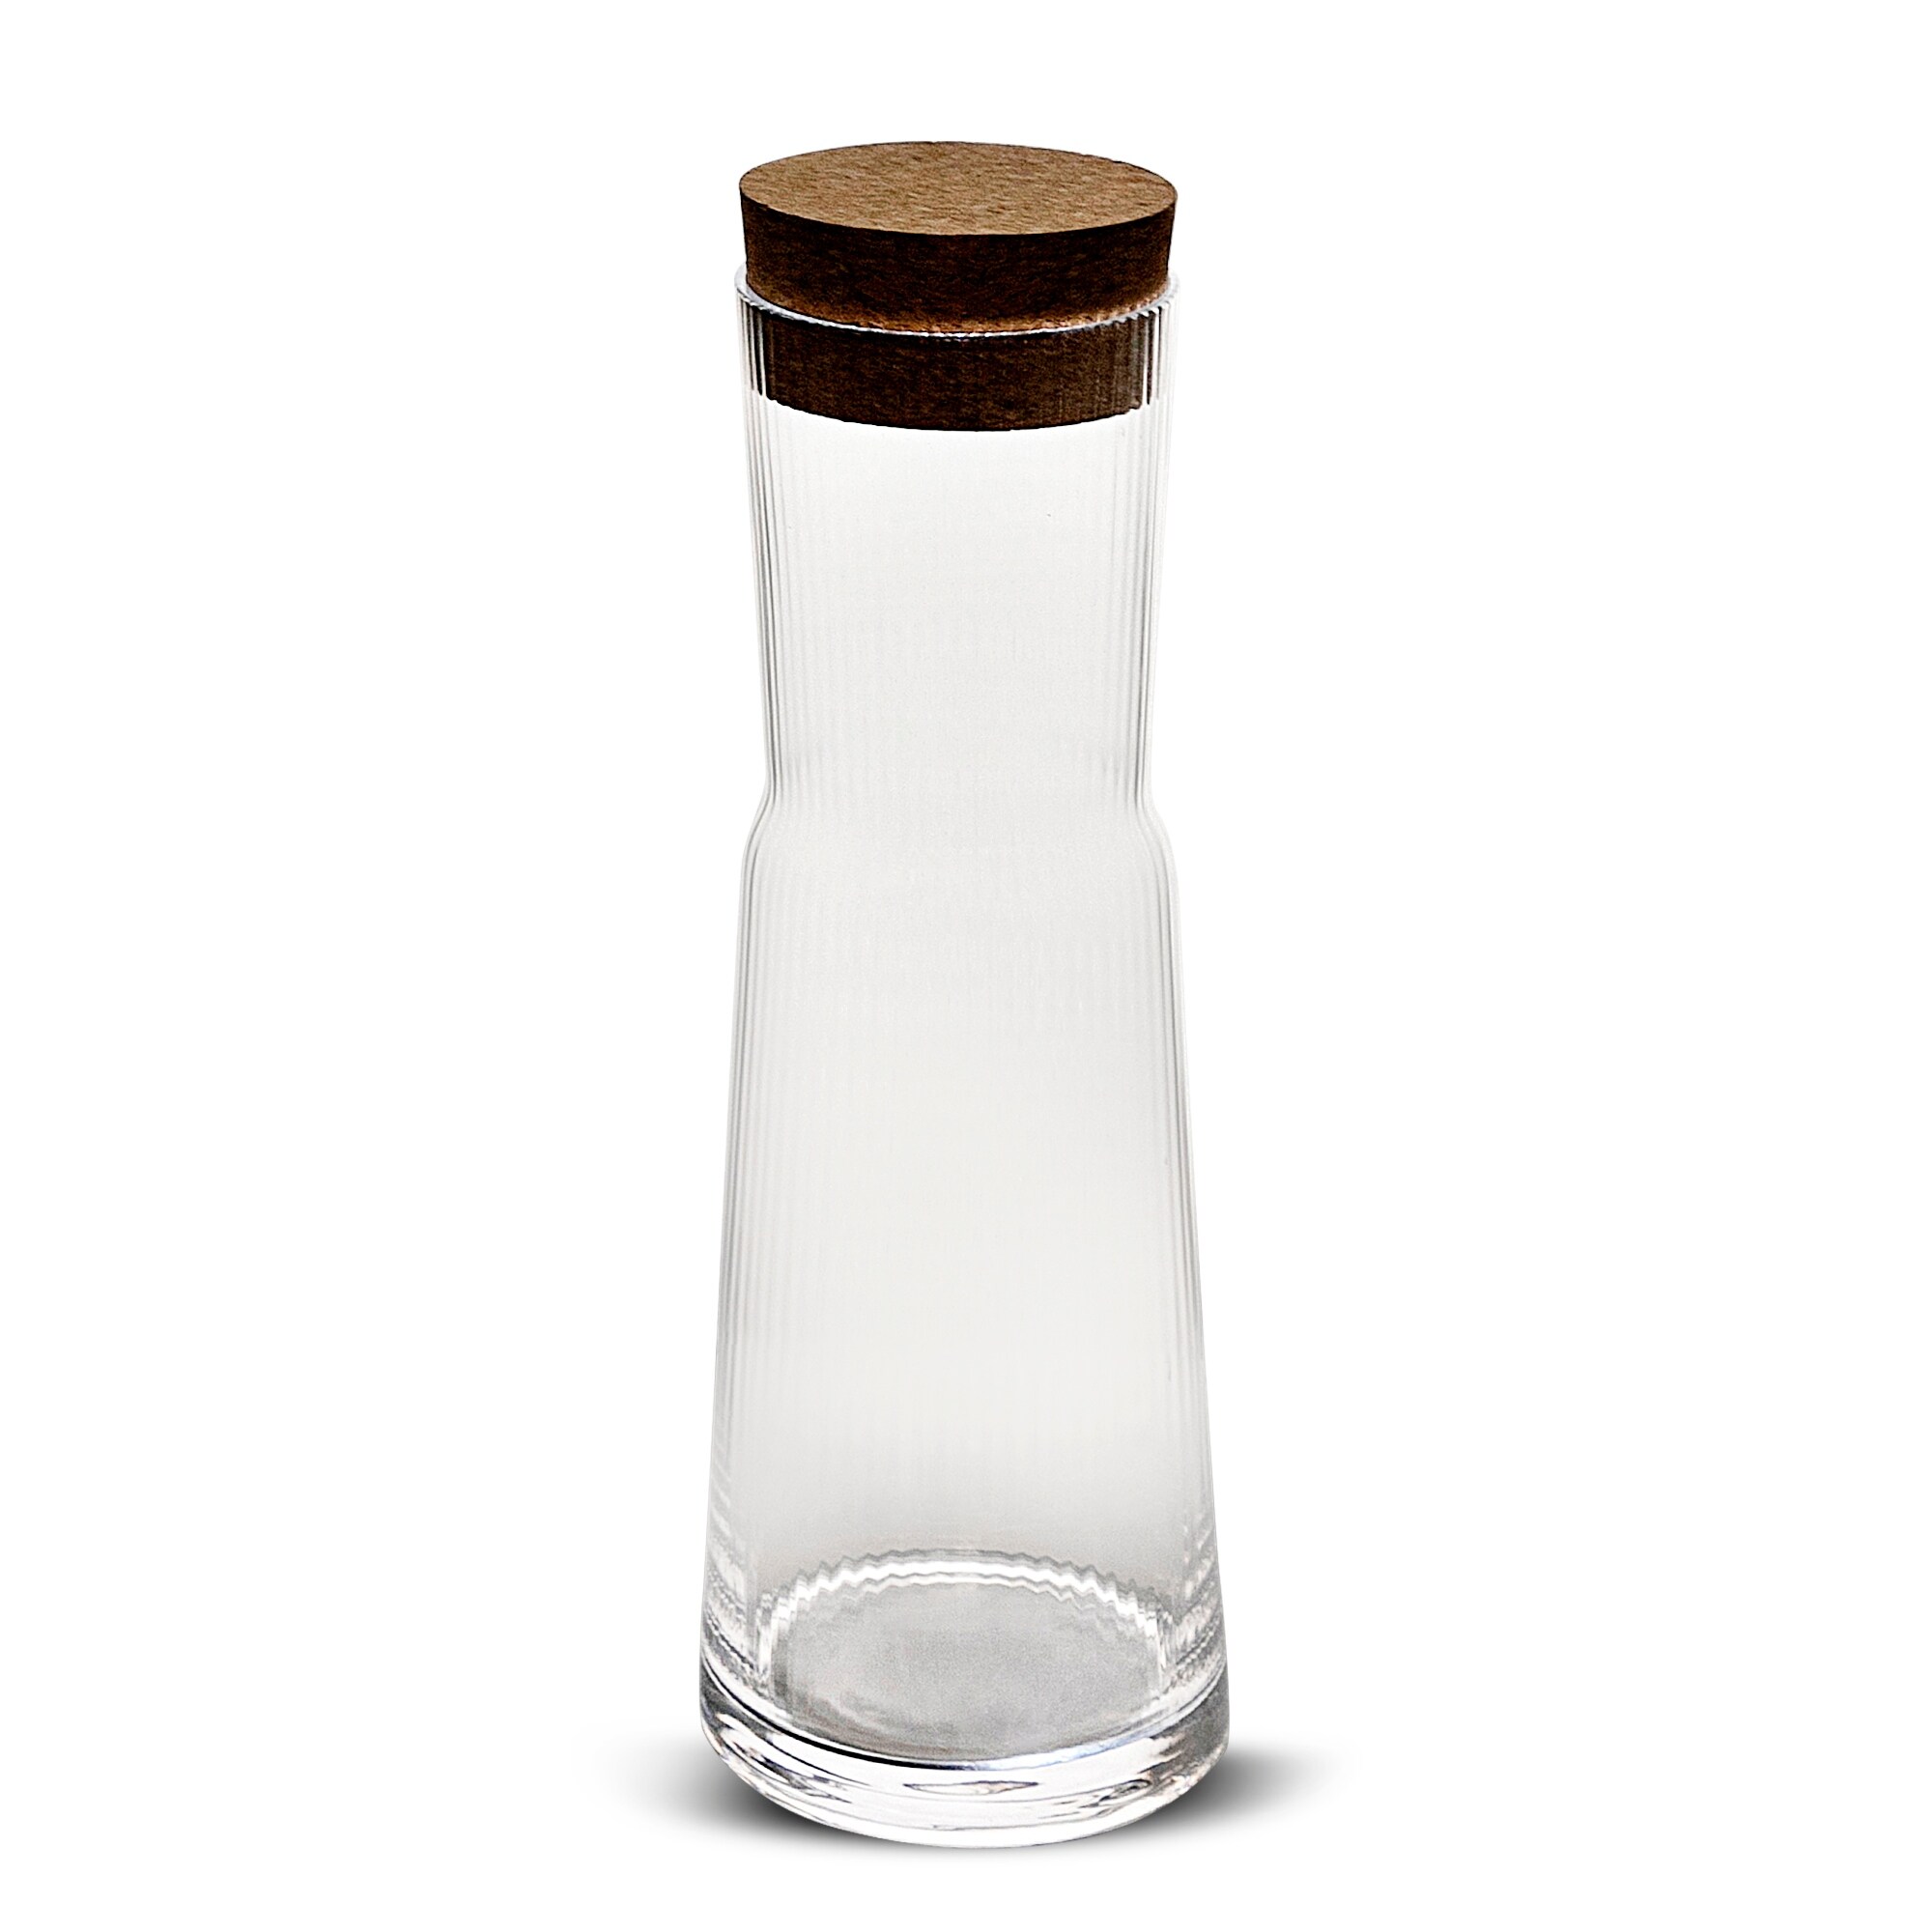 https://ak1.ostkcdn.com/images/products/is/images/direct/da25108a618ceb79df2d63fb132671390c9ab208/Elle-Decor-Carafe-with-Cork-Lid-Ribbed-Glass-Pitcher.jpg